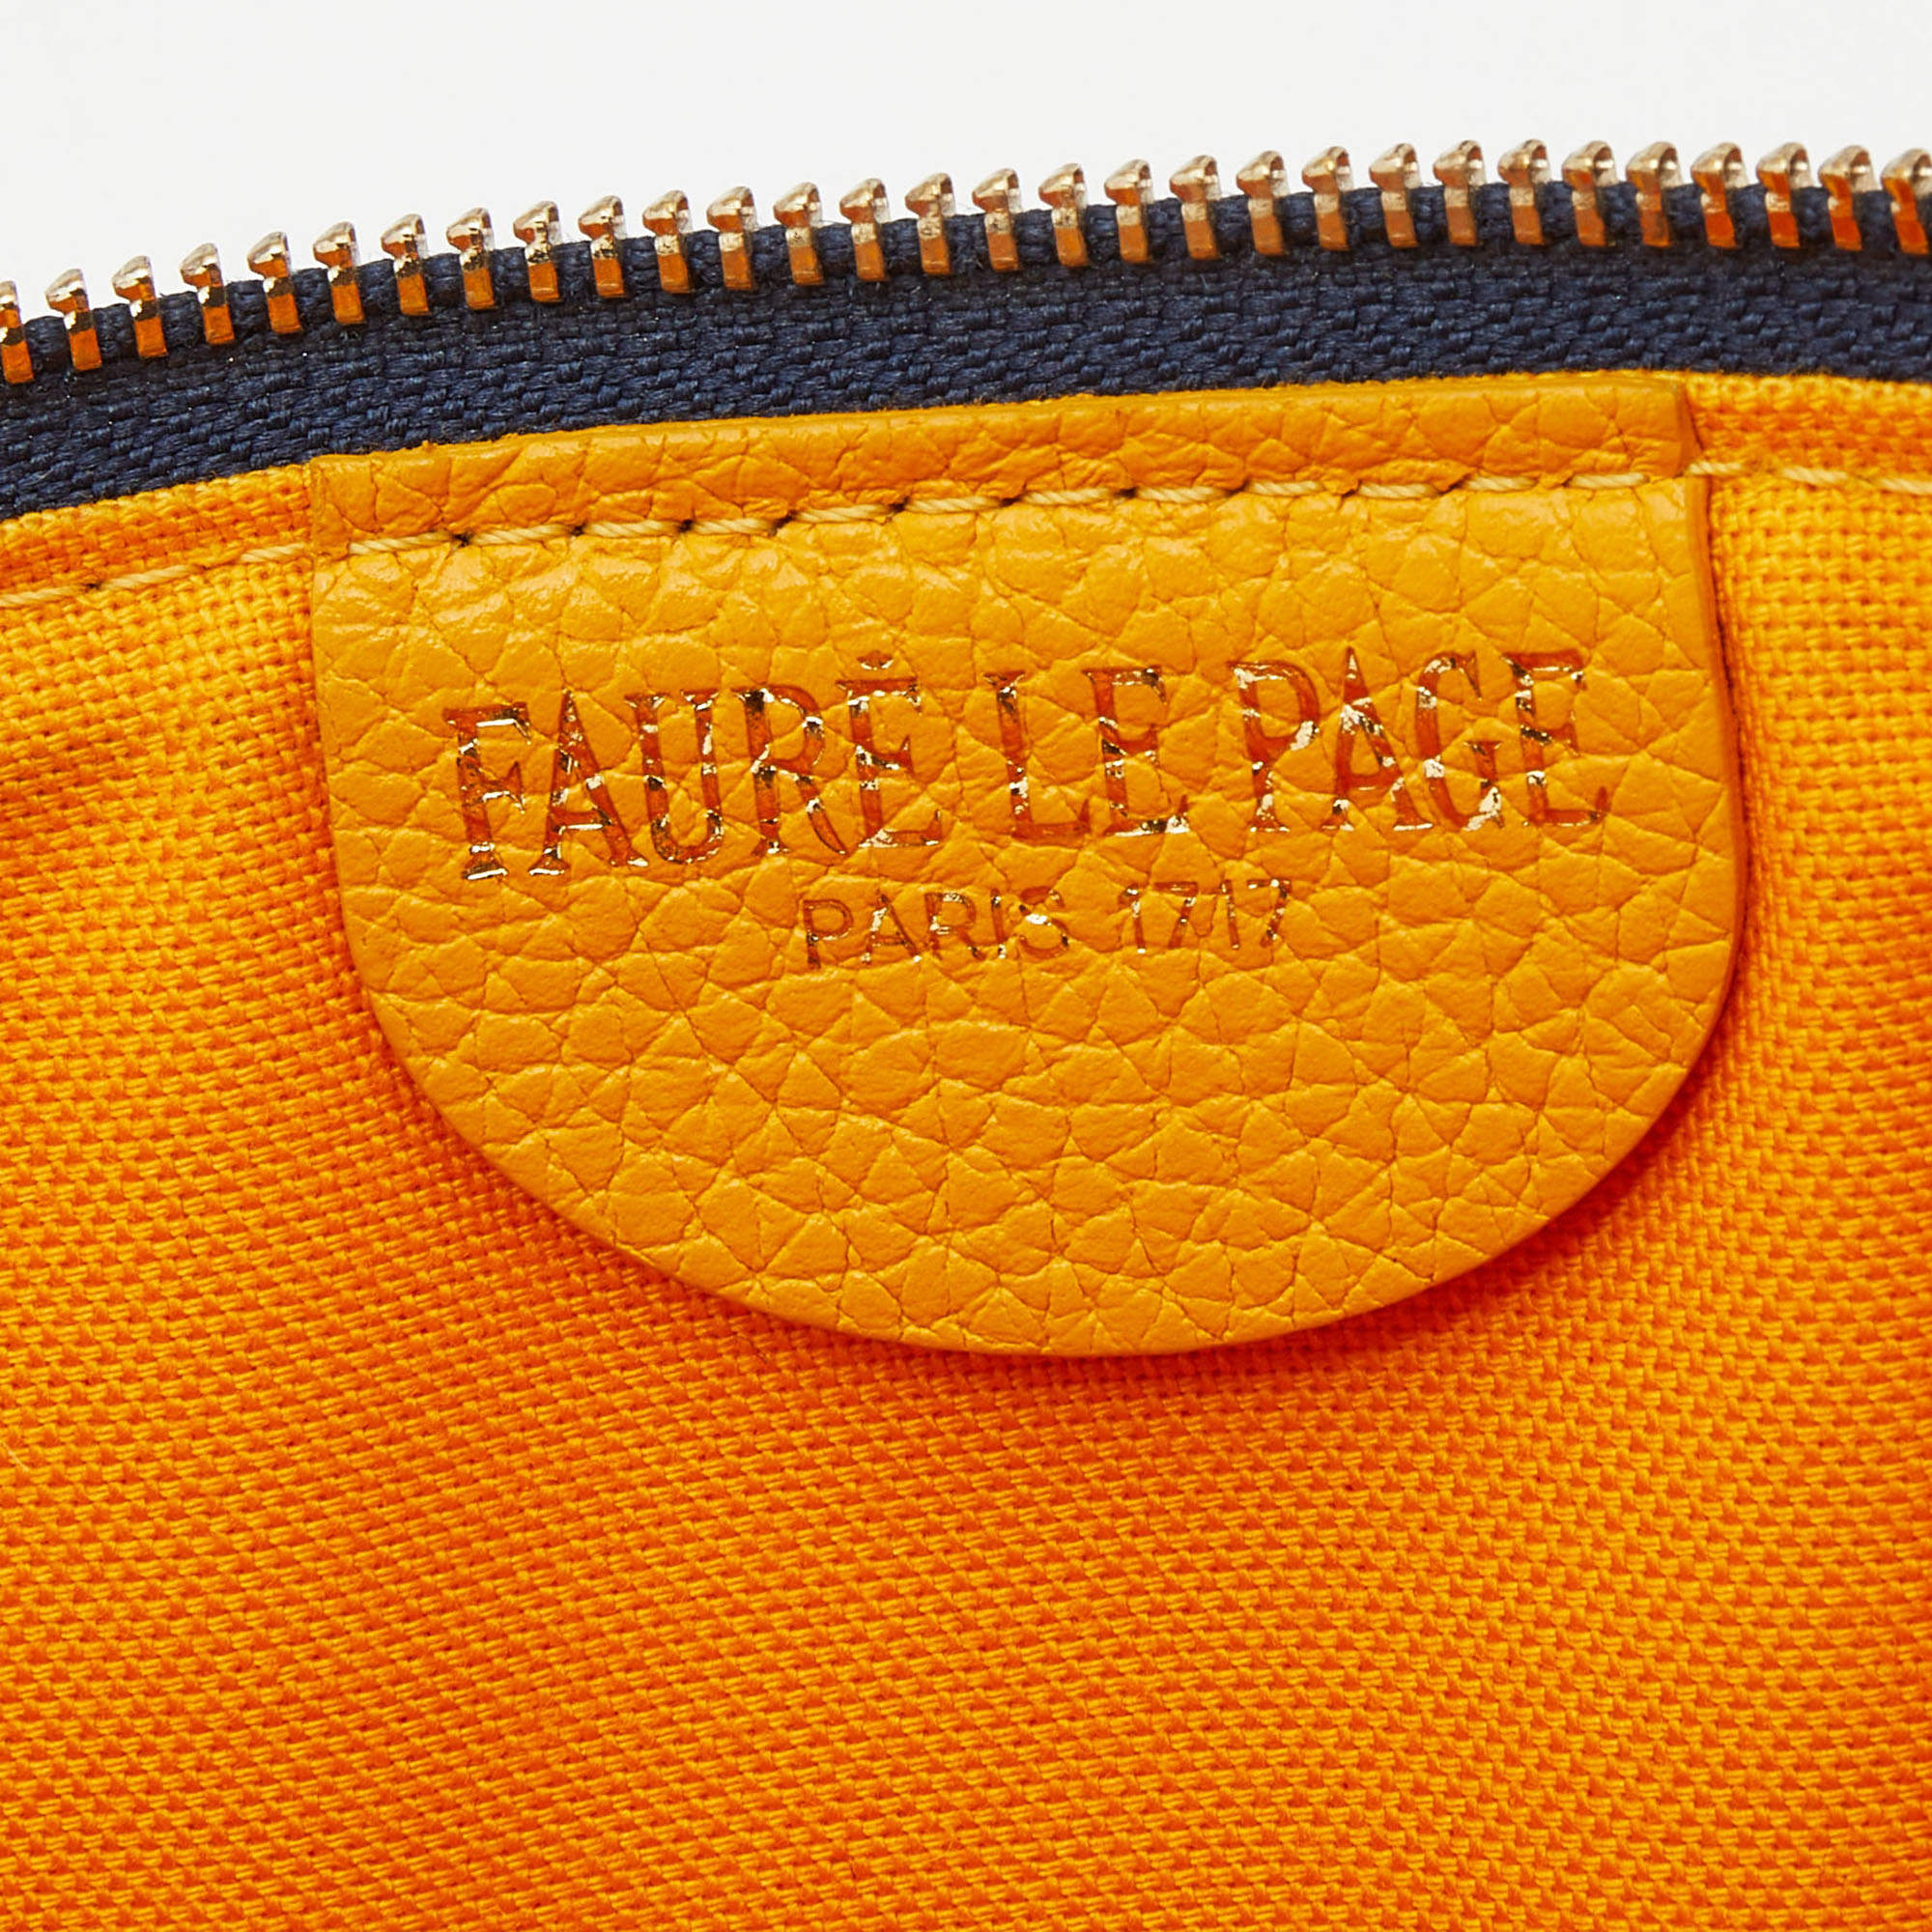 Faure Le Page Multicolor Coated Canvas And Leather Pochette Zip 29